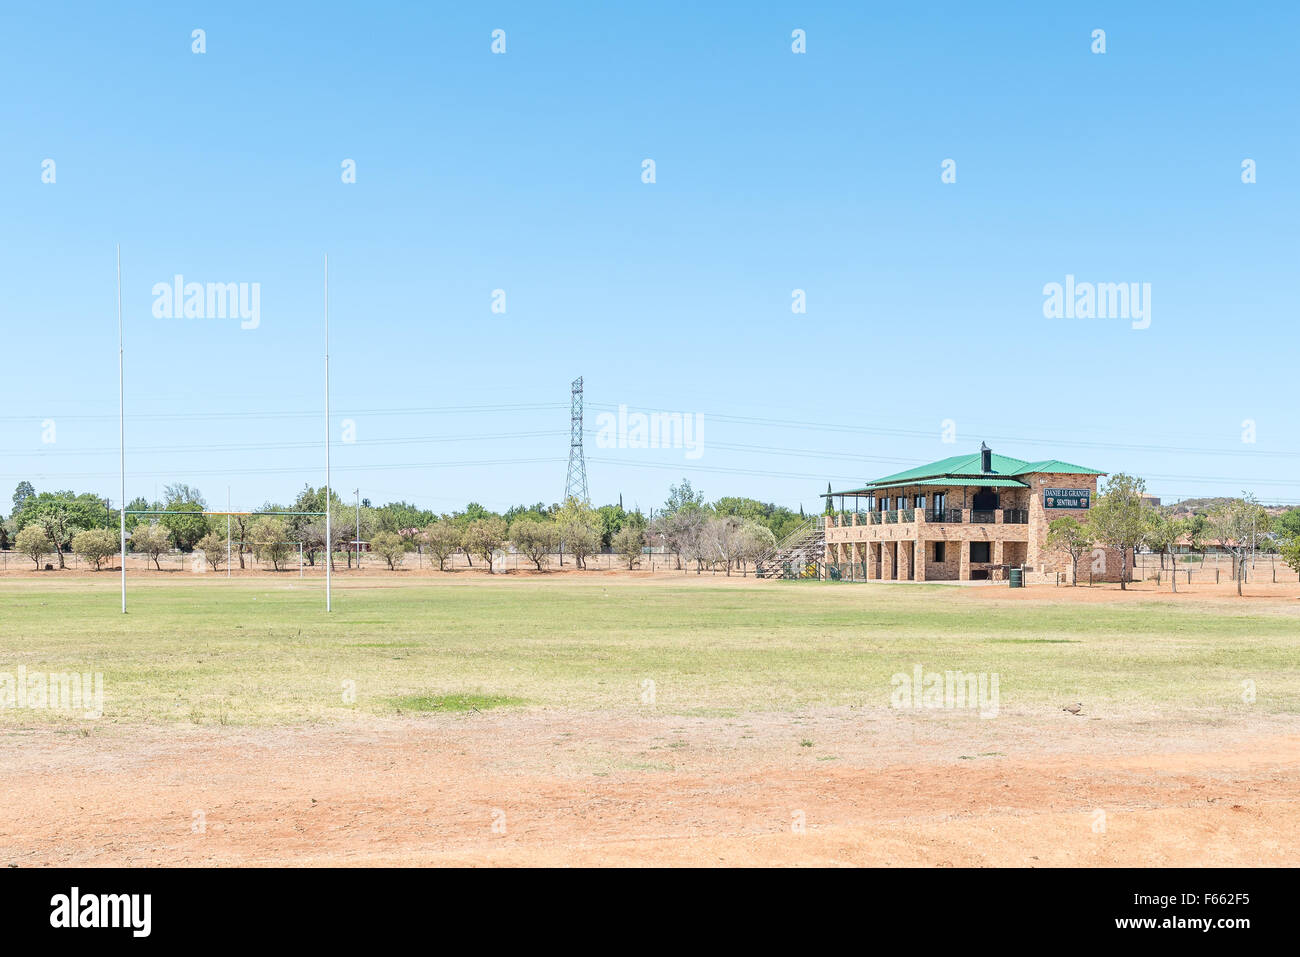 BLOEMFONTEIN, SOUTH AFRICA, NOVEMBER 12, 2015: Sport center of the Jim Fouche Secondary School in Gardenia Park, a suburb of Blo Stock Photo